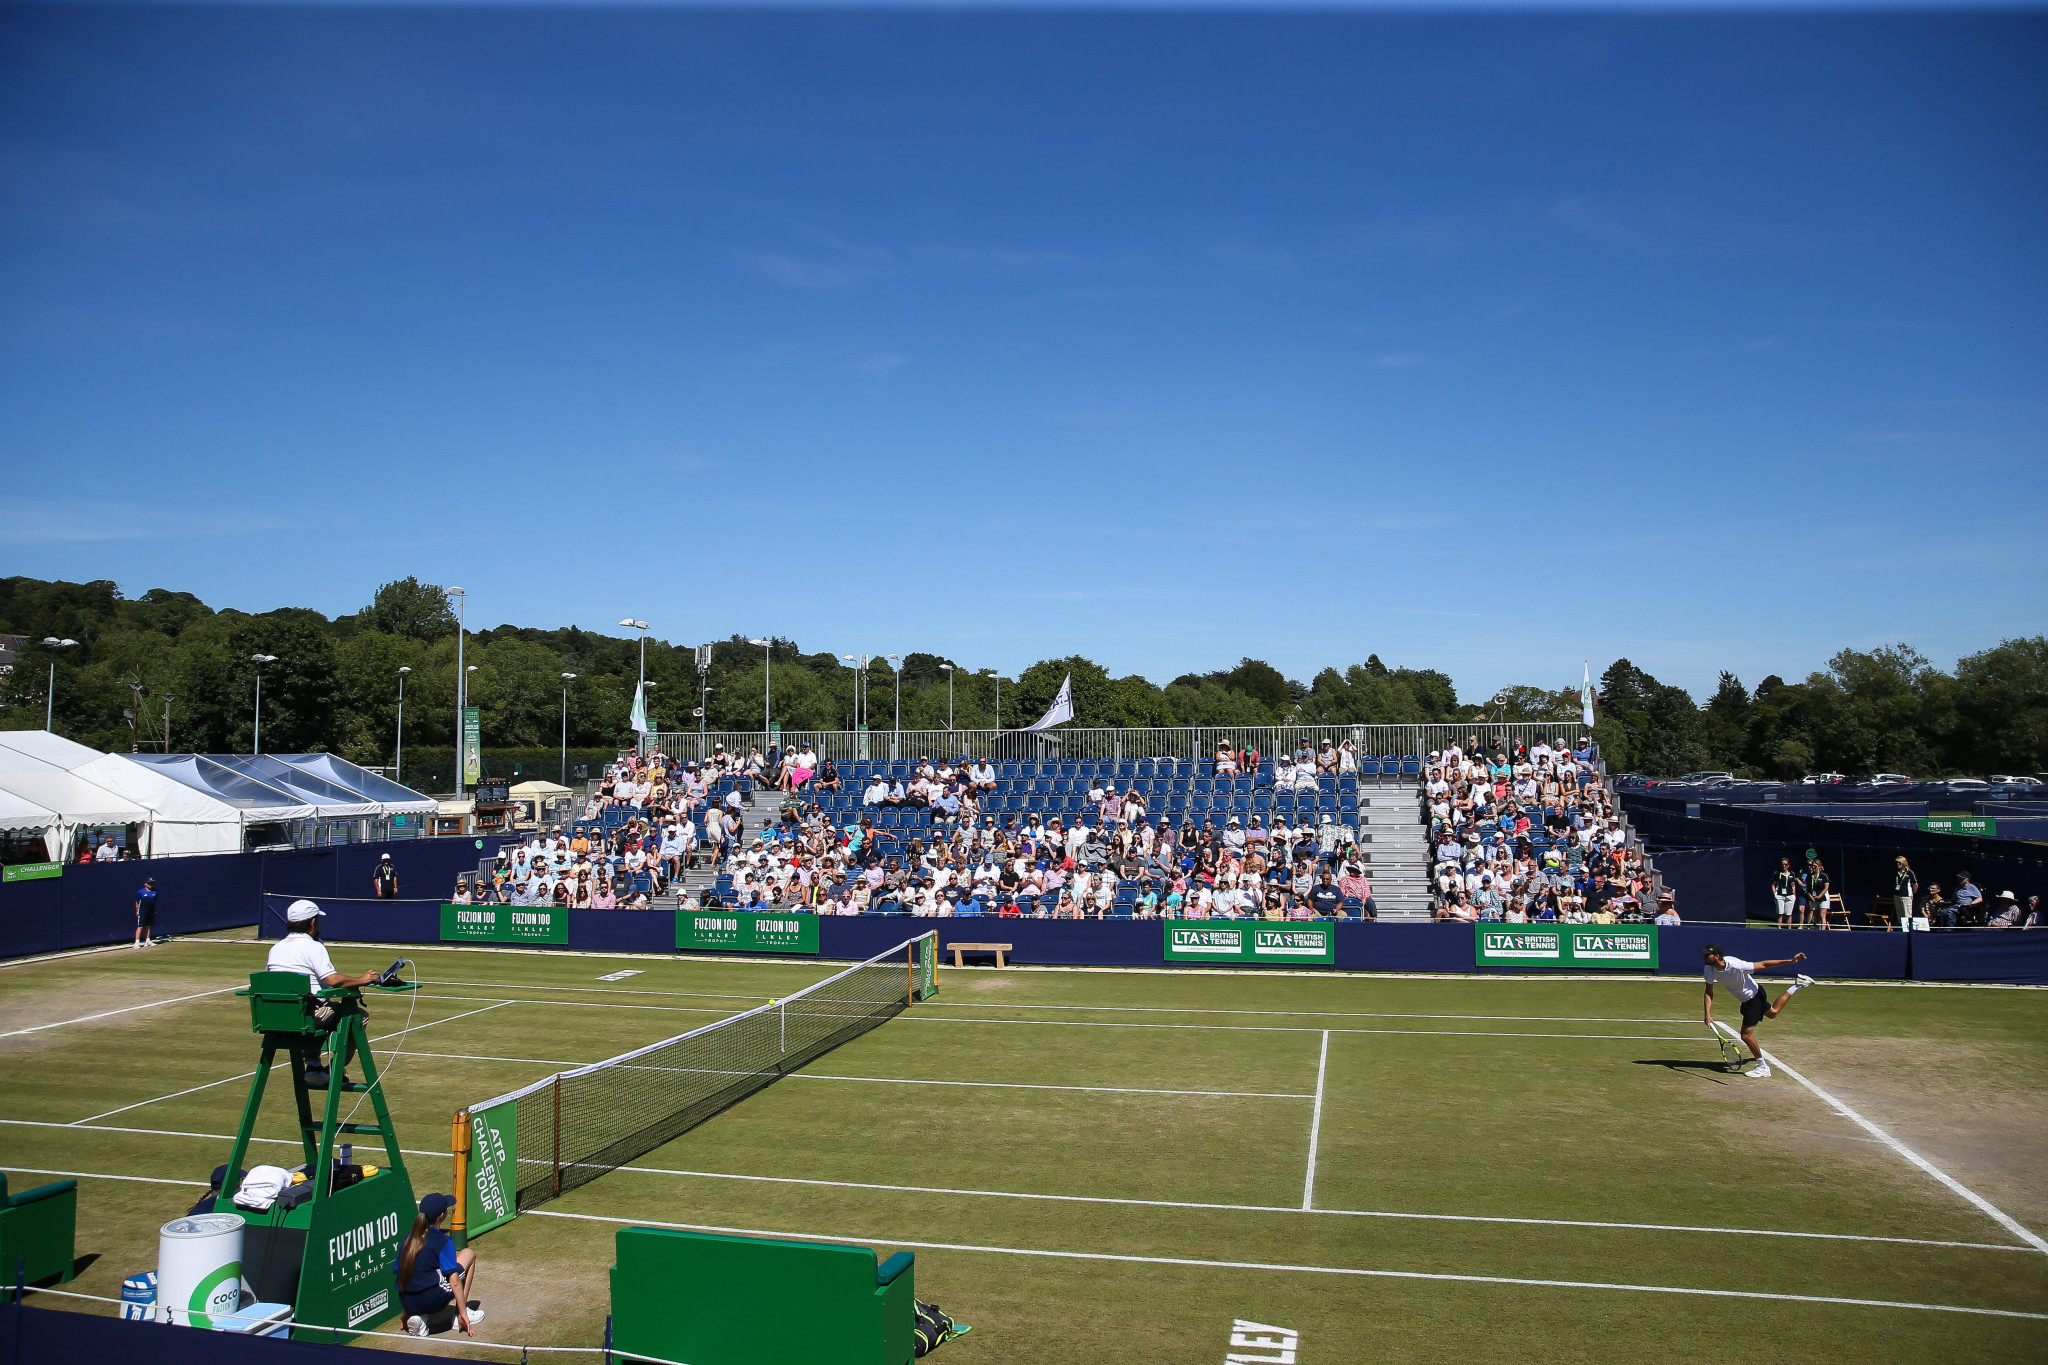 LTA has said that "45 per cent of park courts are categorised as being in poor, very poor or unplayable condition" ©Getty Images